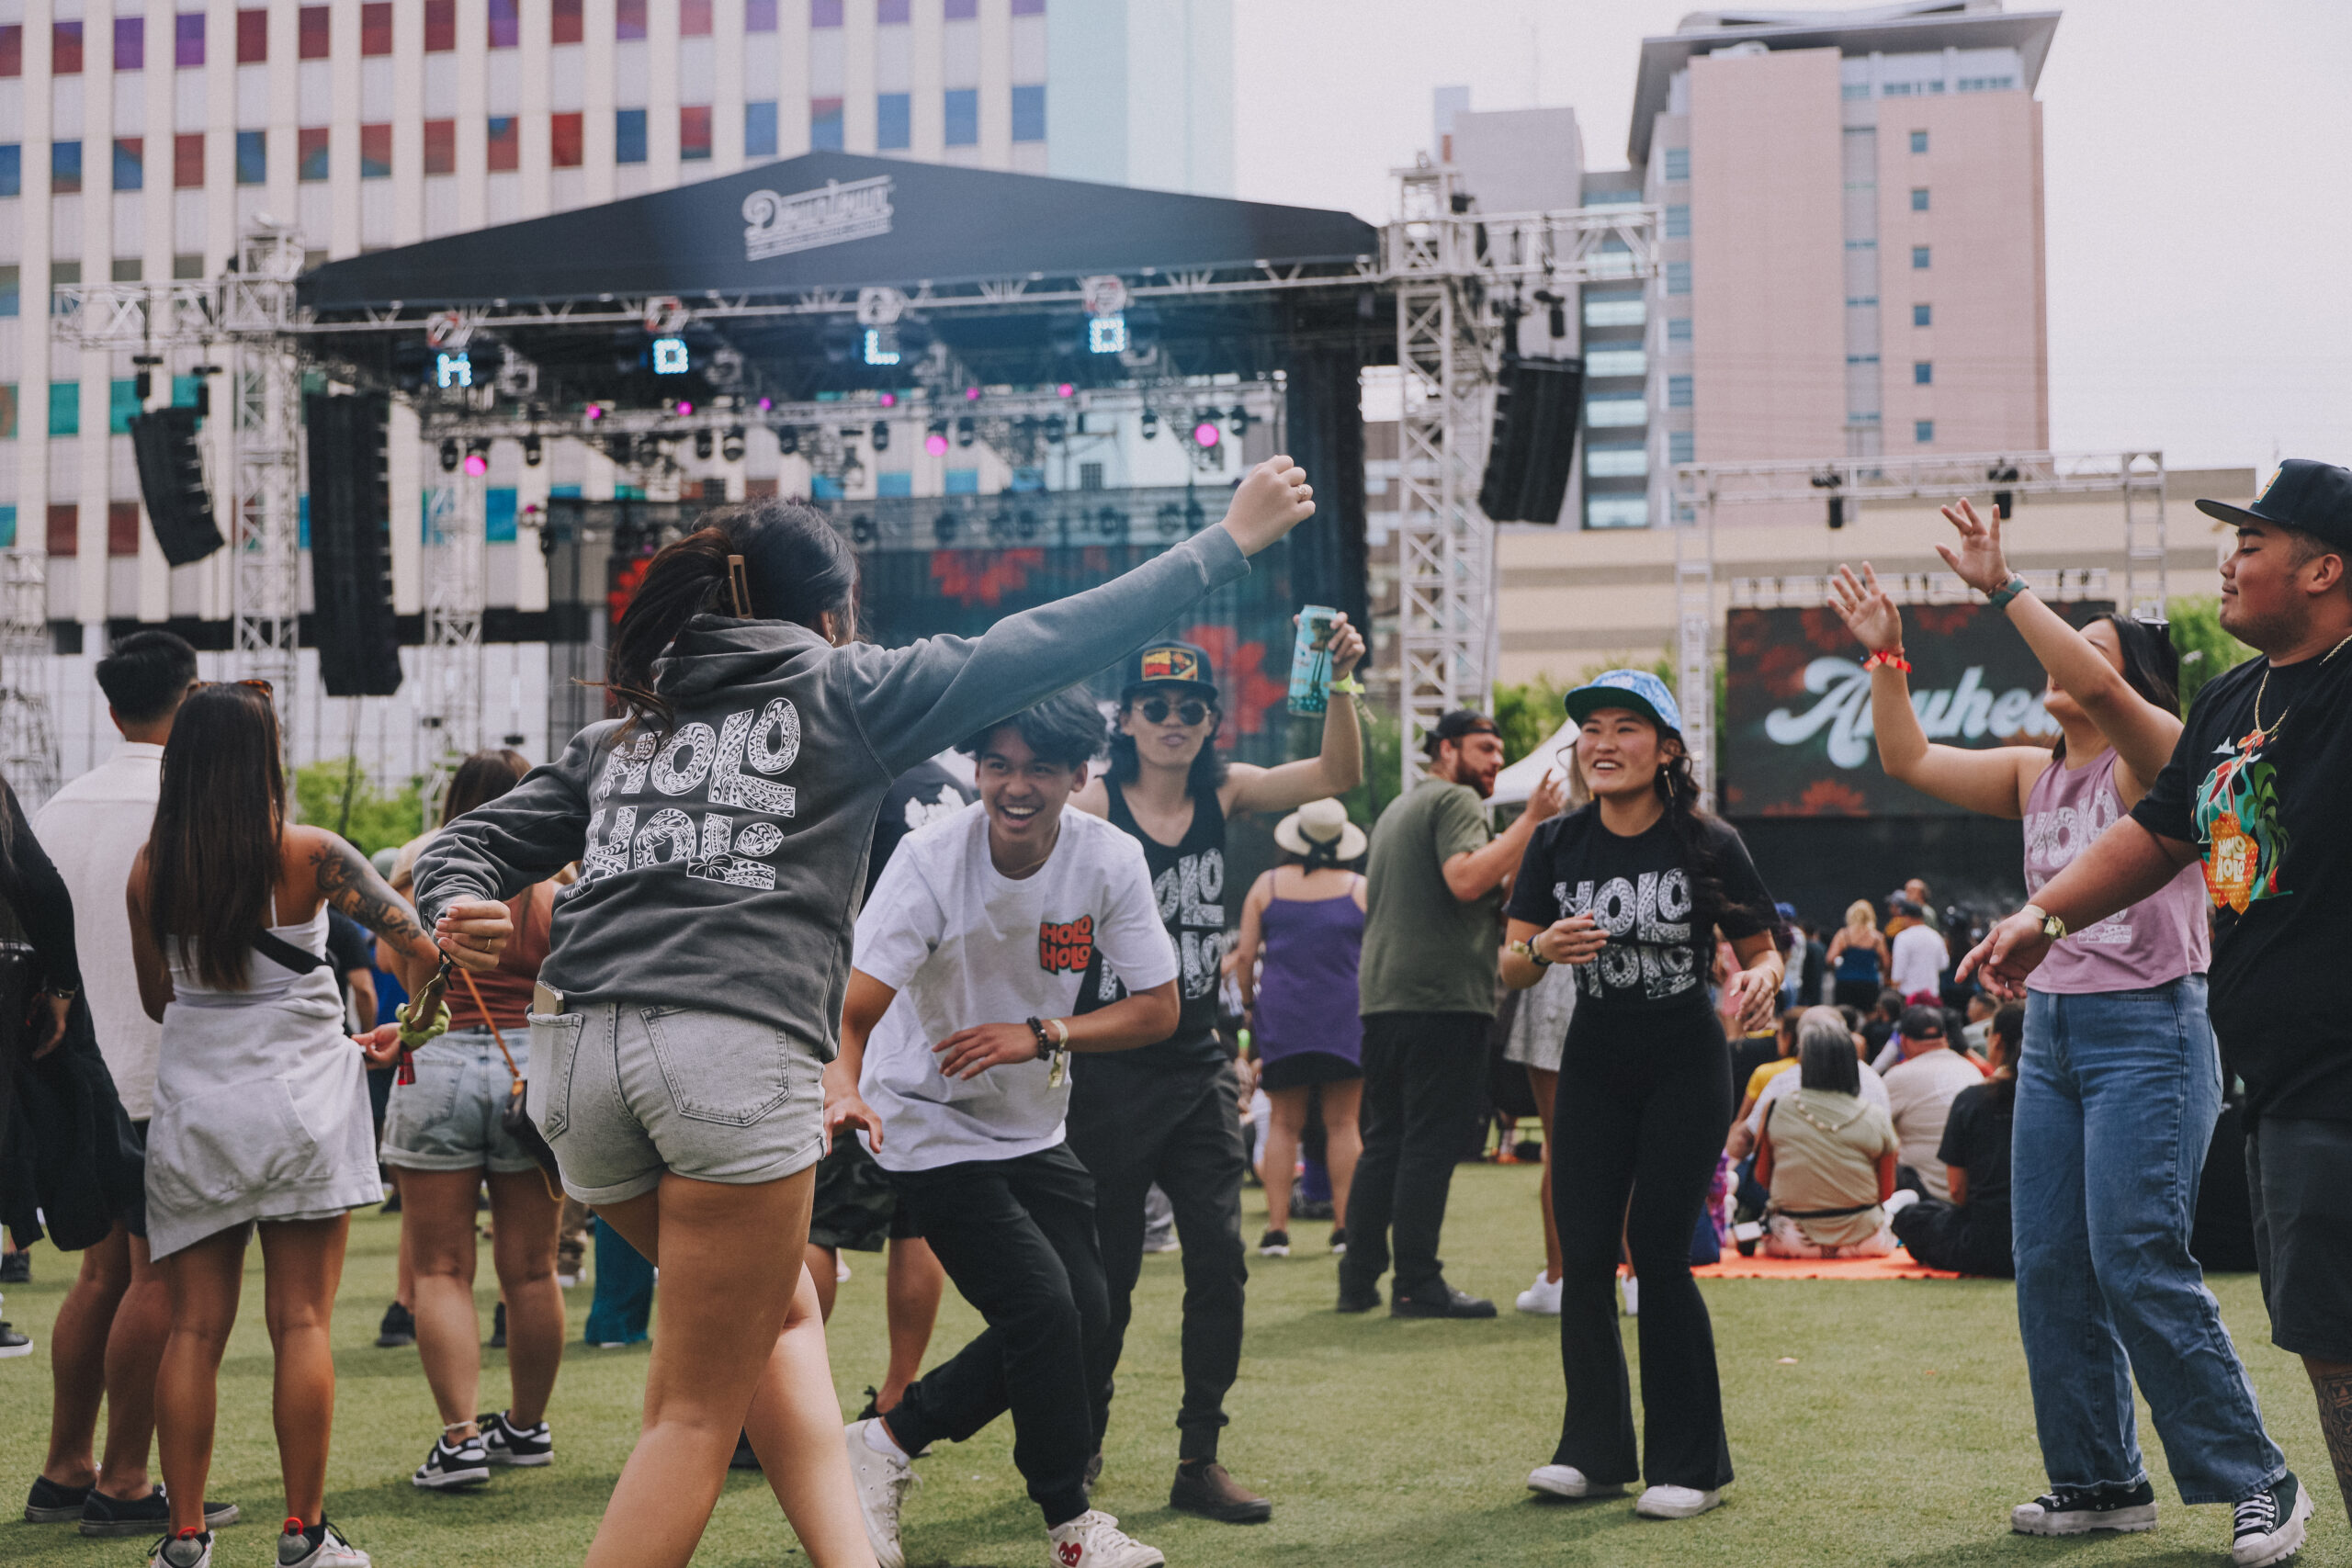 Guests dance in the crowd in front of the DLVEC stage.